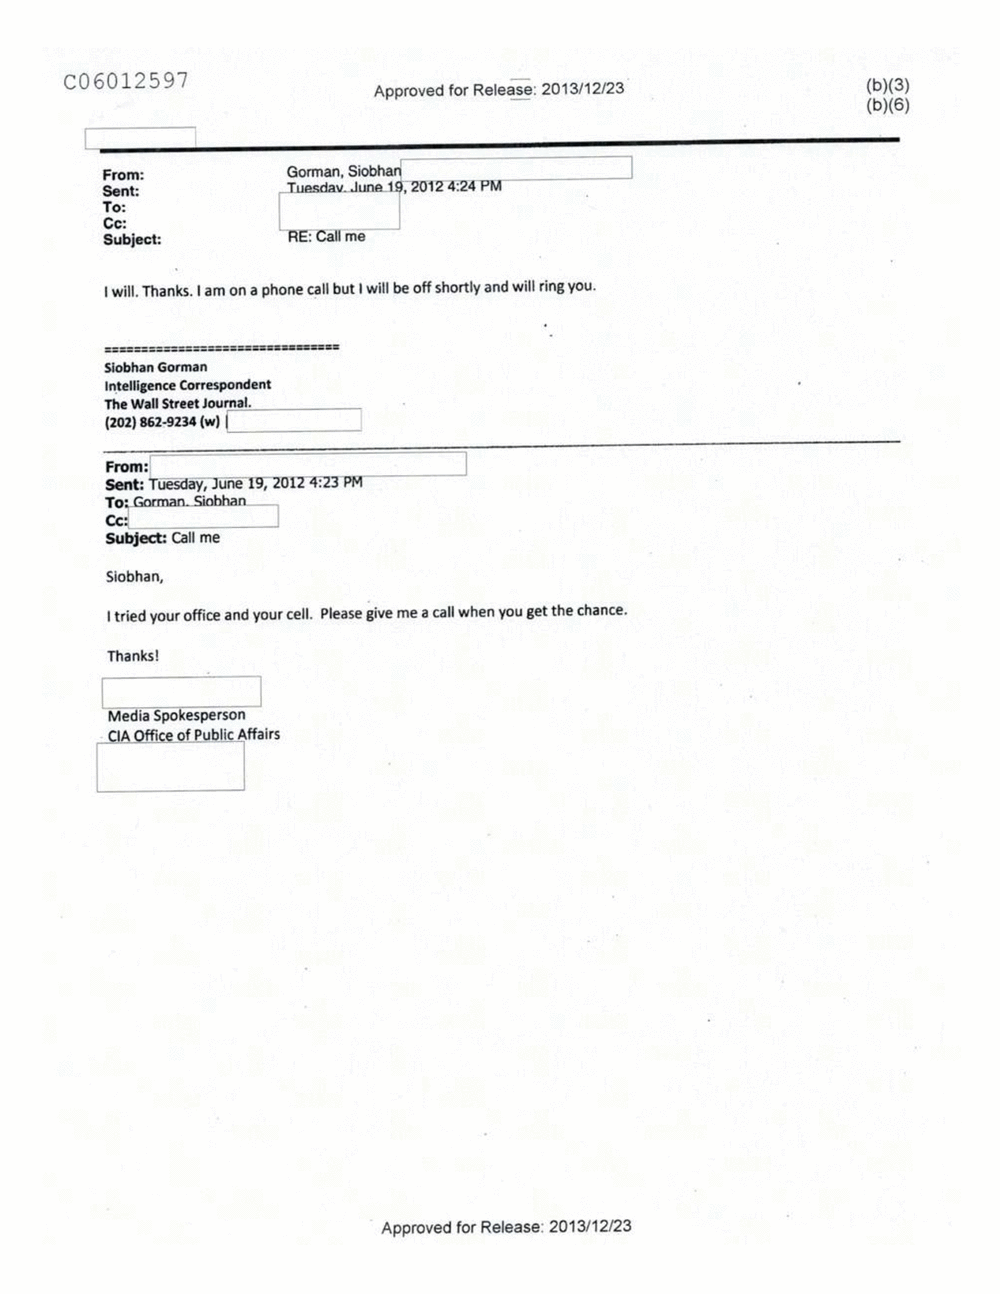 Page 152 from Email Correspondence Between Reporters and CIA Flacks